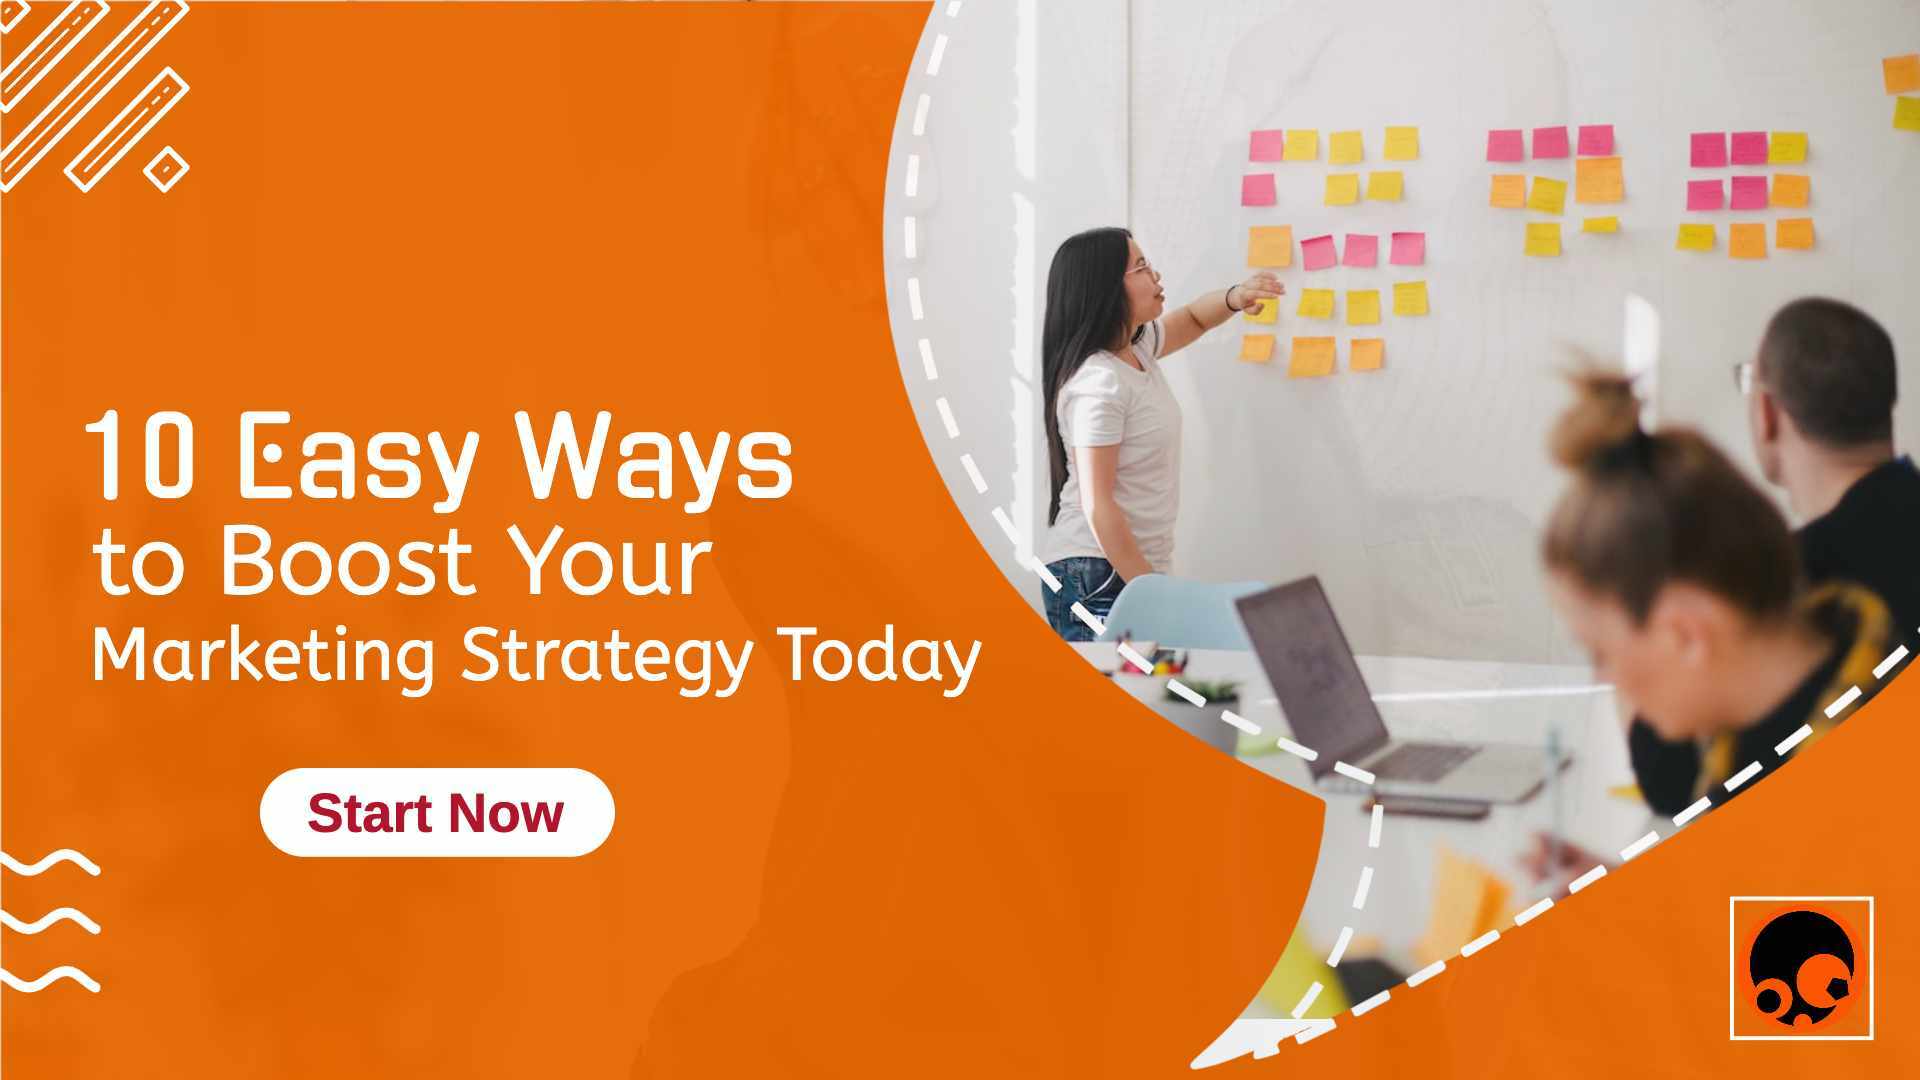 10 Easy Ways to Boost Your Marketing Strategy Today